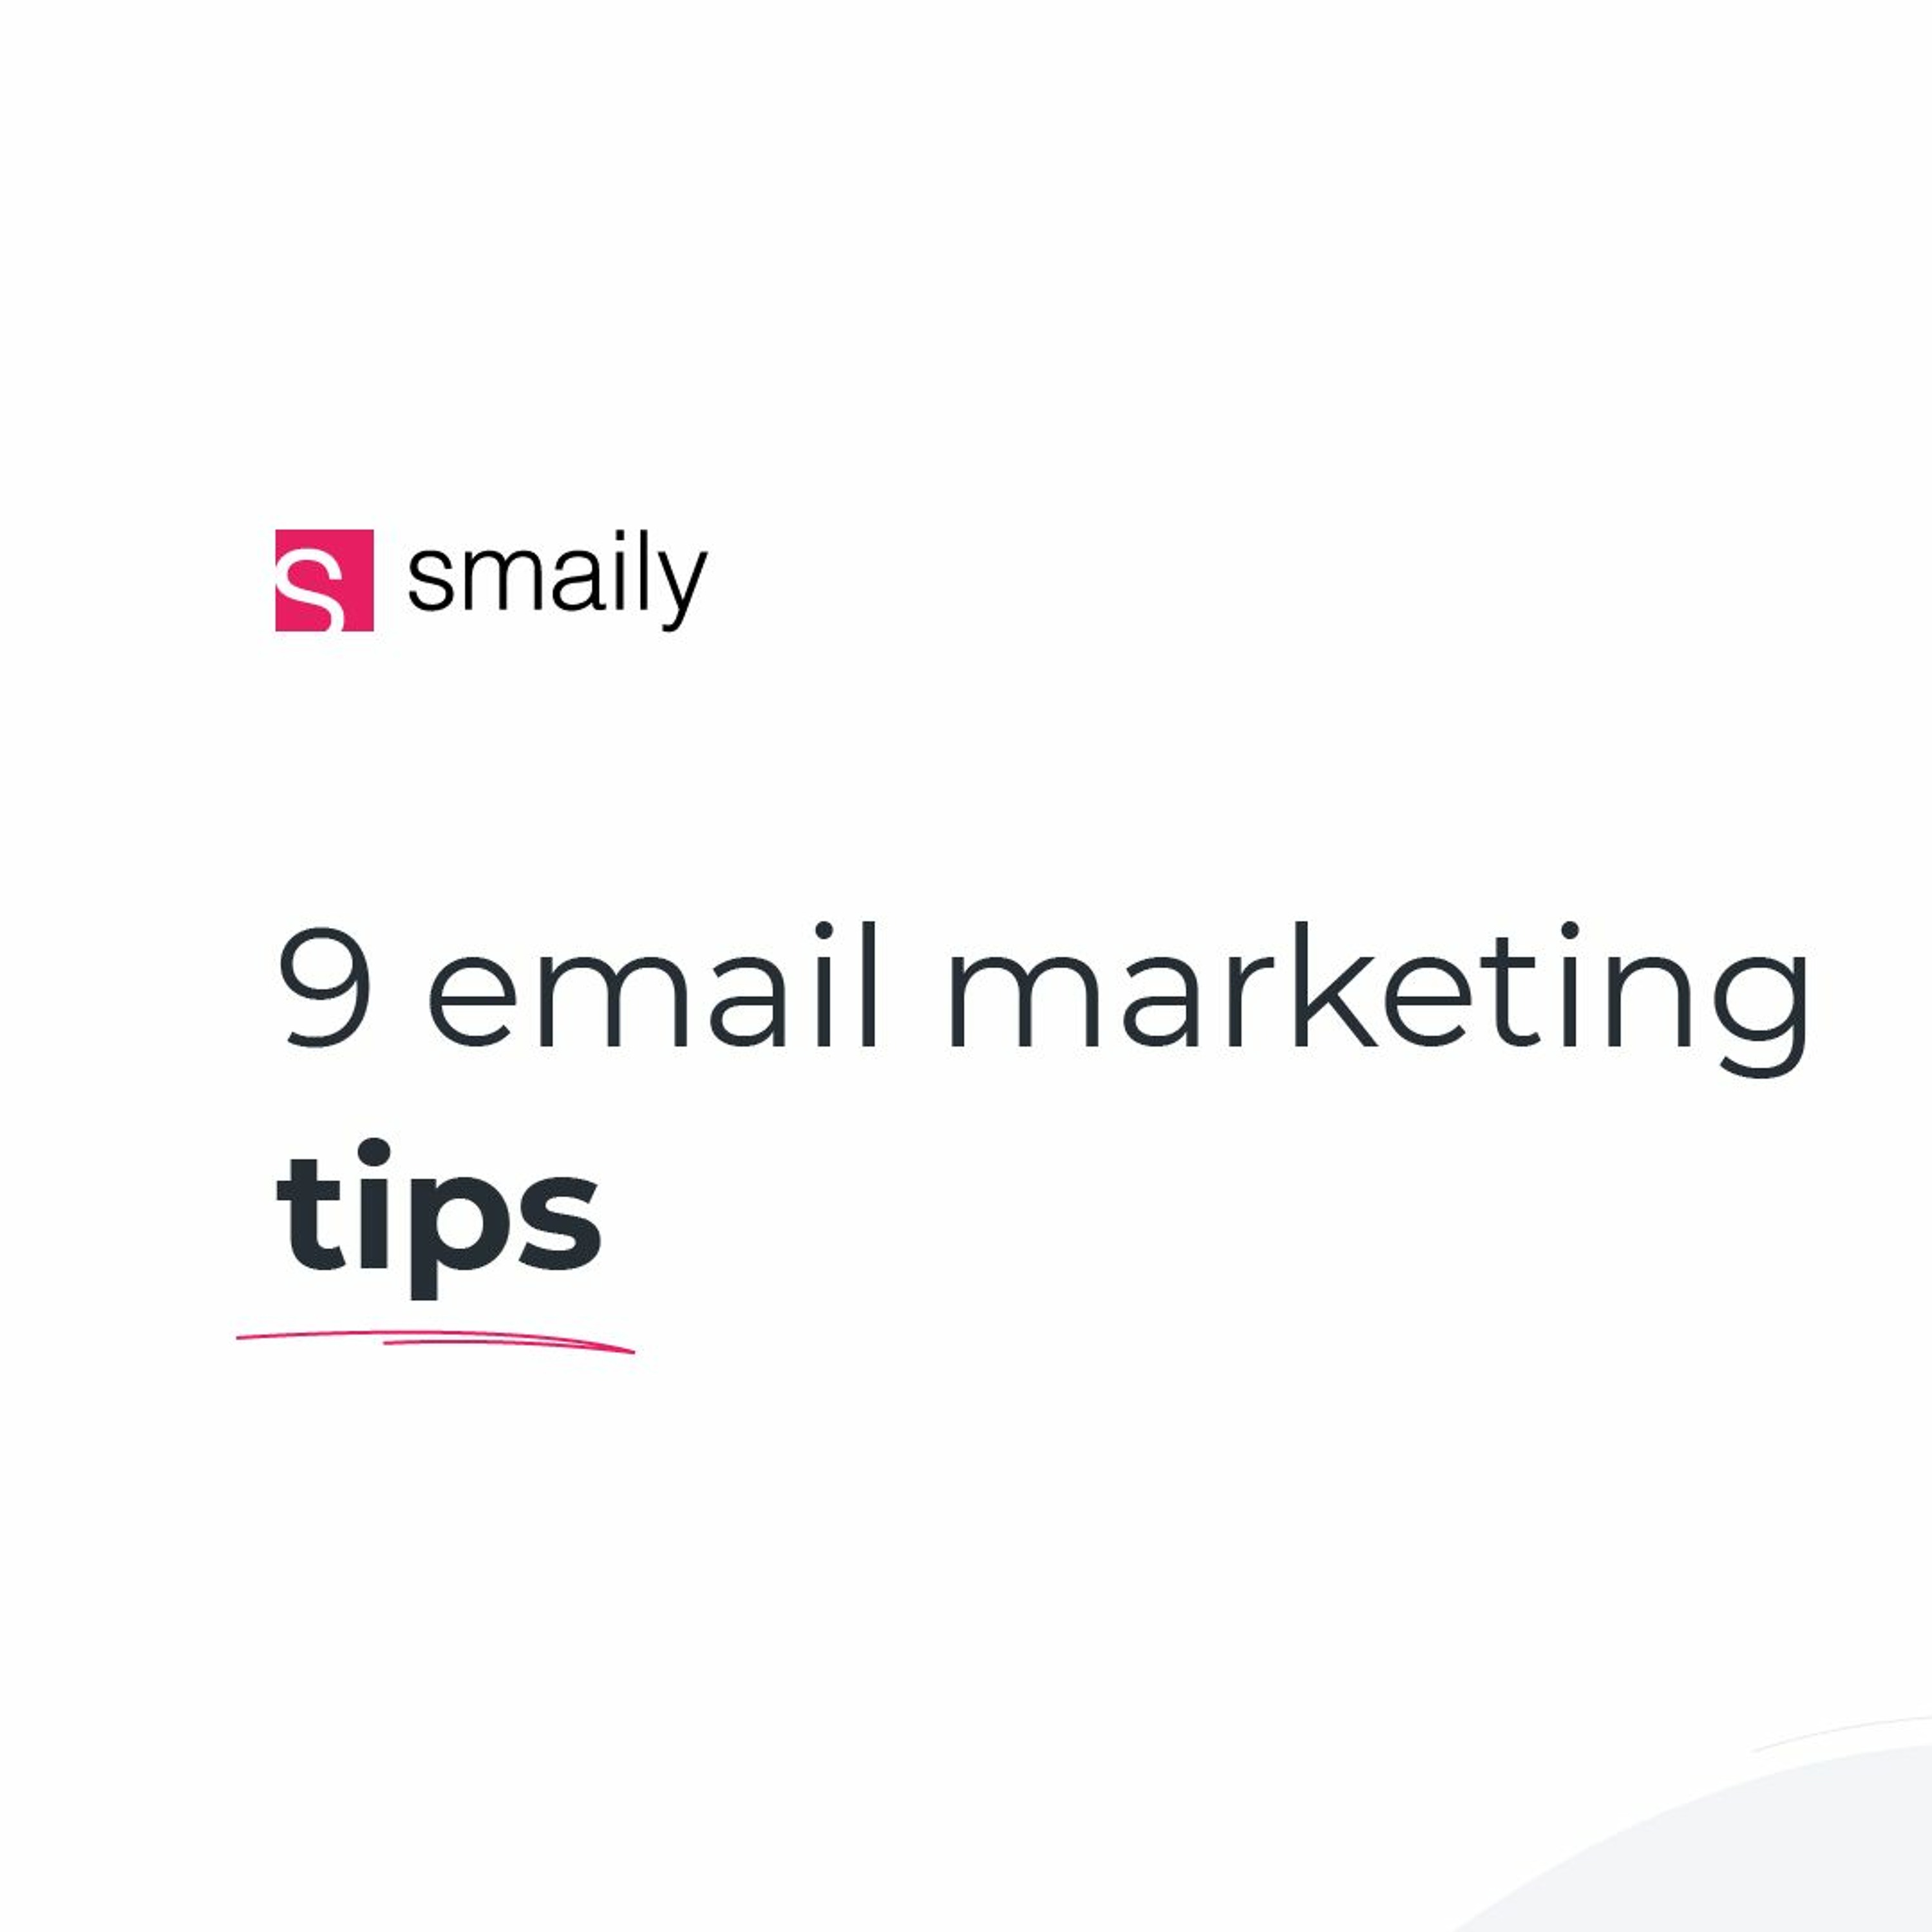 Smaily email marketing tips & tricks podcast #1, April 2021